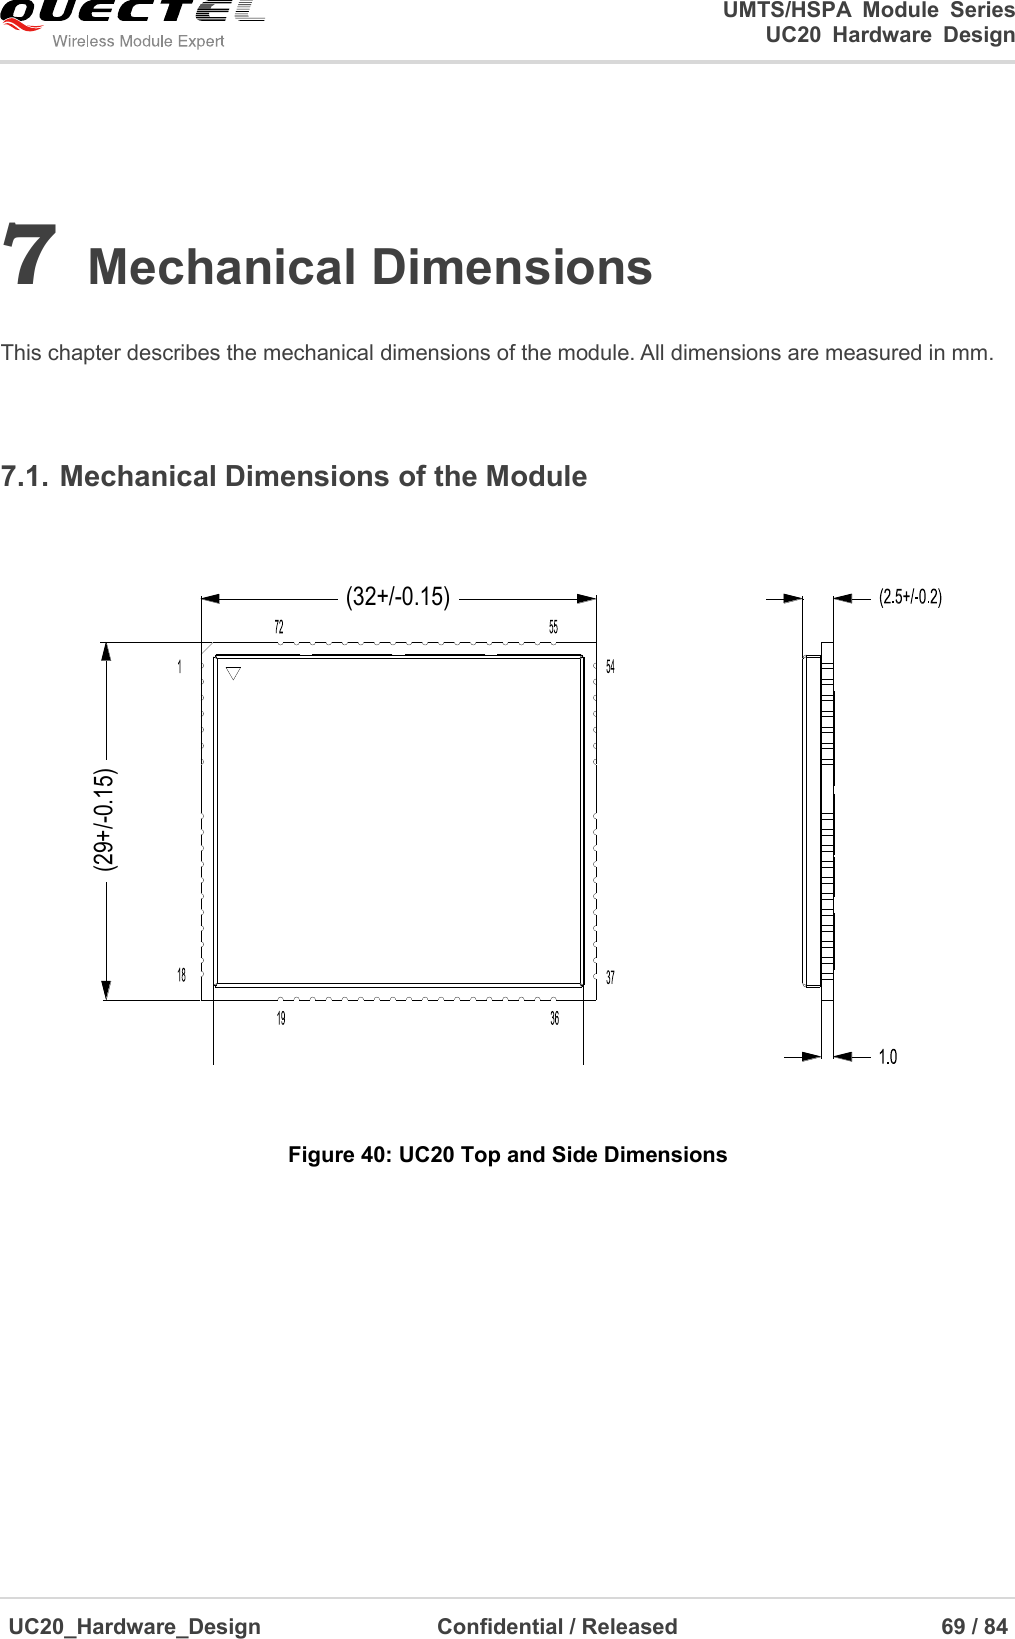                                                                                                                                               UMTS/HSPA  Module  Series                                                                 UC20  Hardware  Design  UC20_Hardware_Design                  Confidential / Released                            69 / 84     7 Mechanical Dimensions  This chapter describes the mechanical dimensions of the module. All dimensions are measured in mm.  7.1. Mechanical Dimensions of the Module (32+/-0.15)(29+/-0.15) Figure 40: UC20 Top and Side Dimensions  